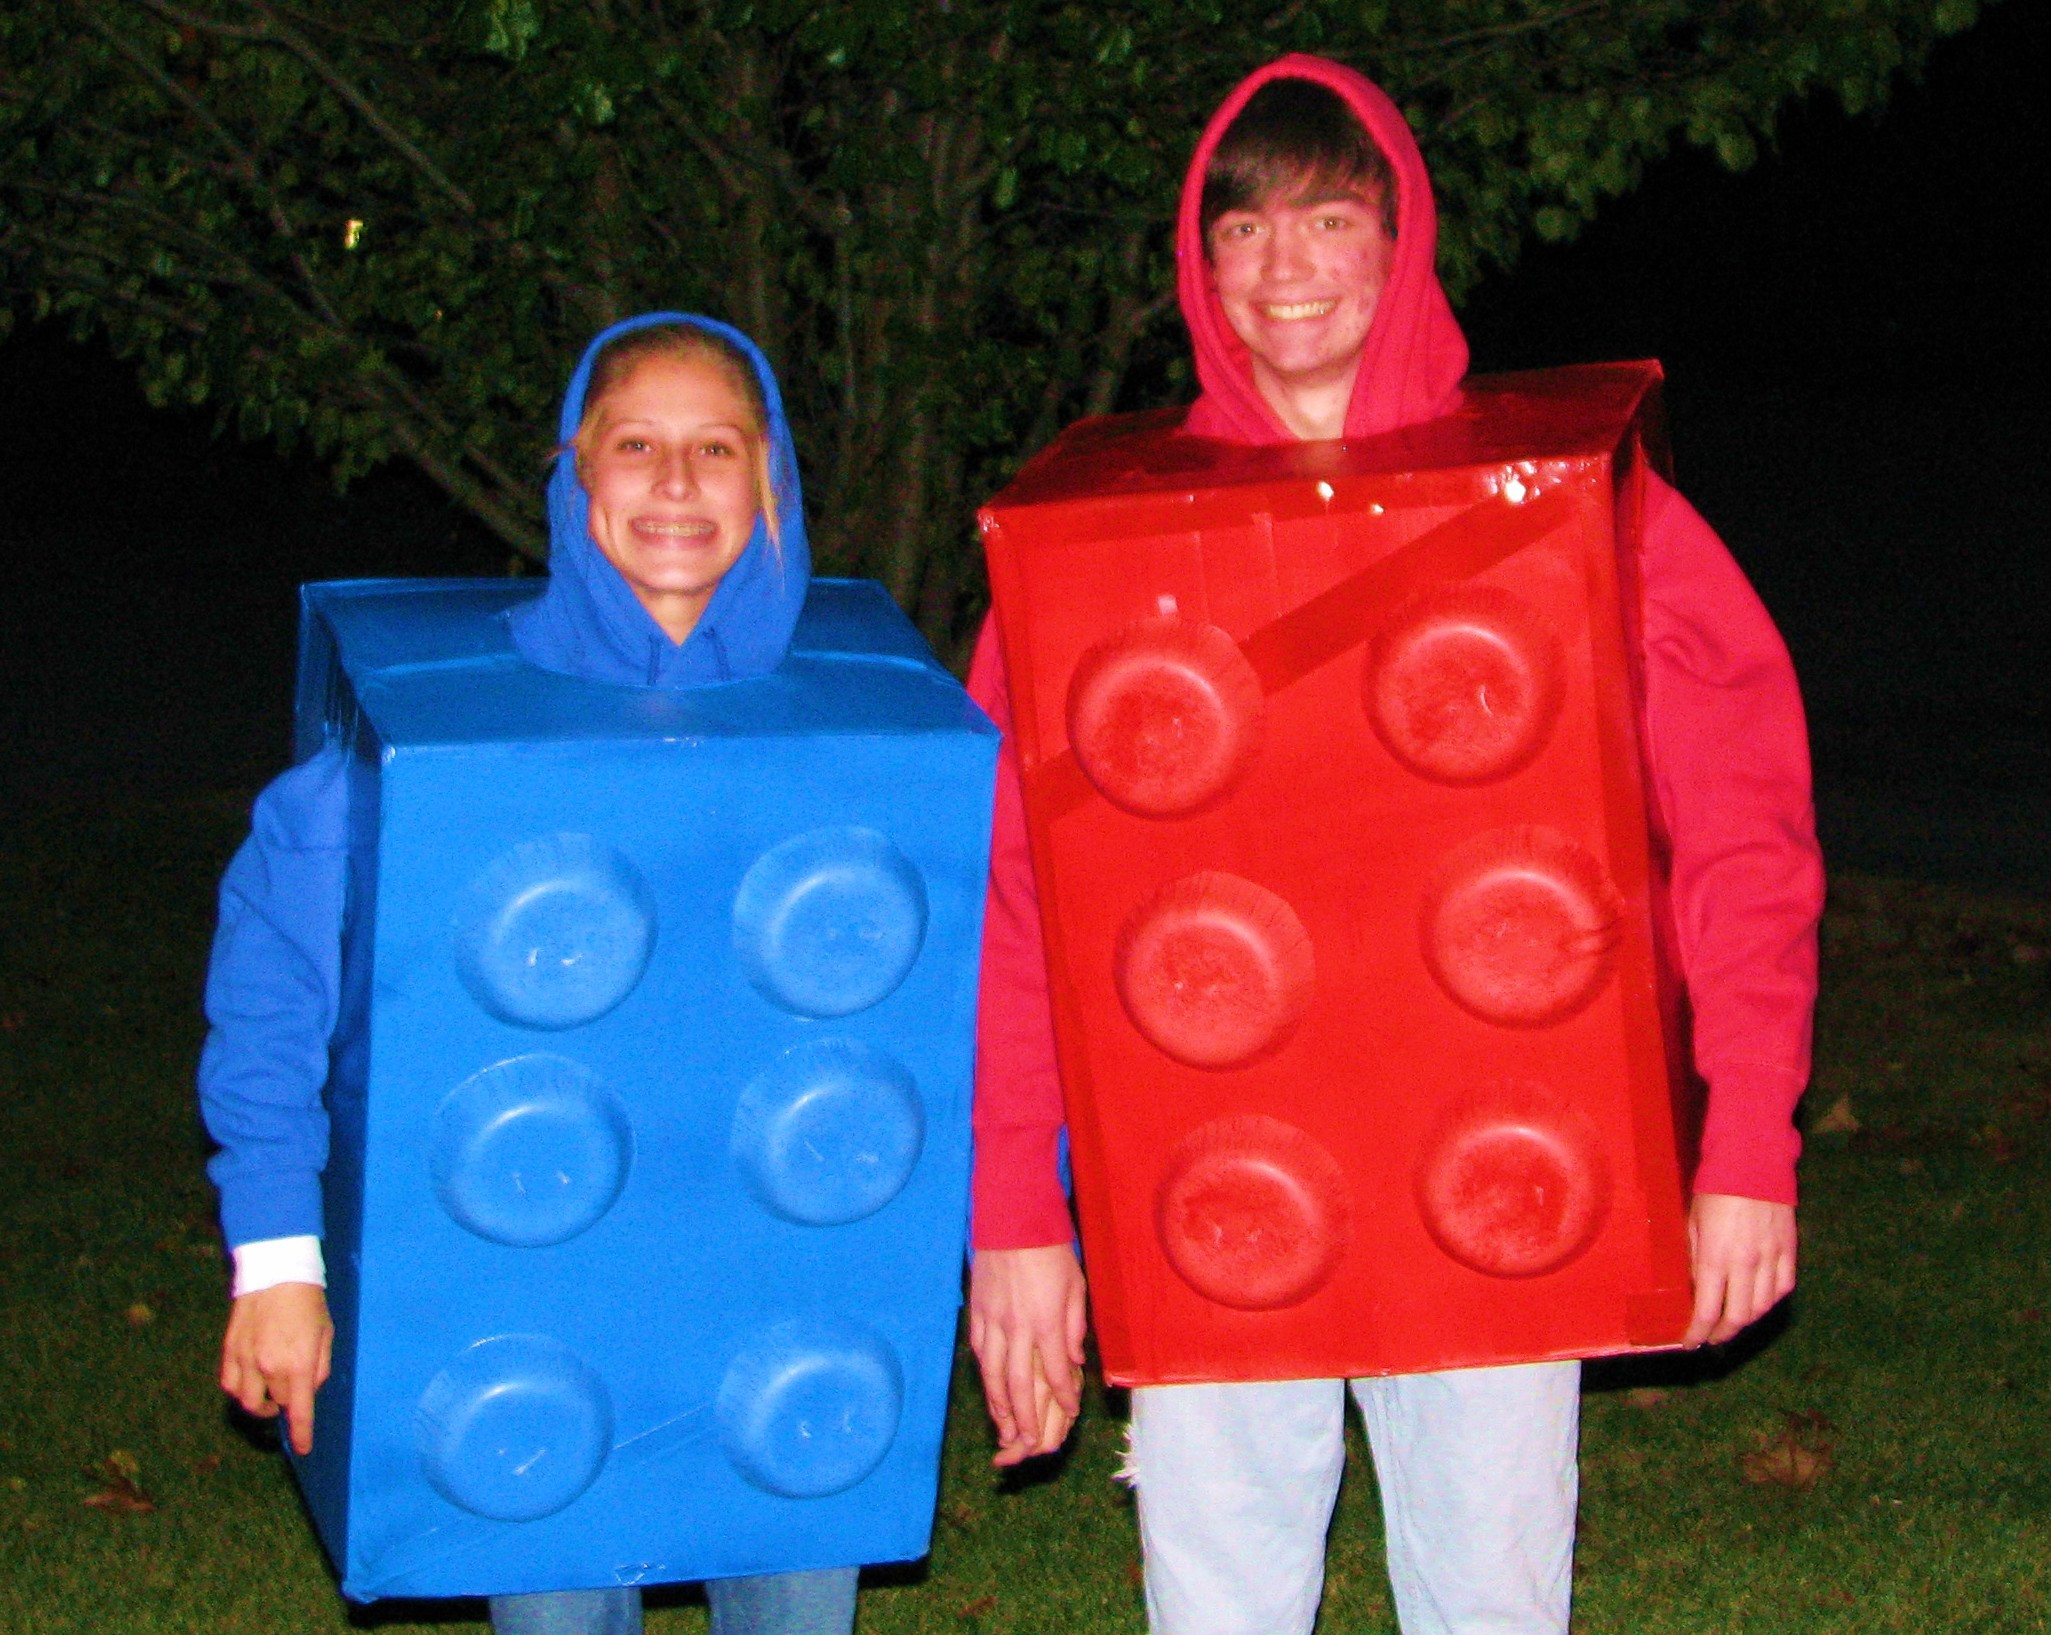 Lego Costume DIY
 LEGO Halloween Costume using recycled materials